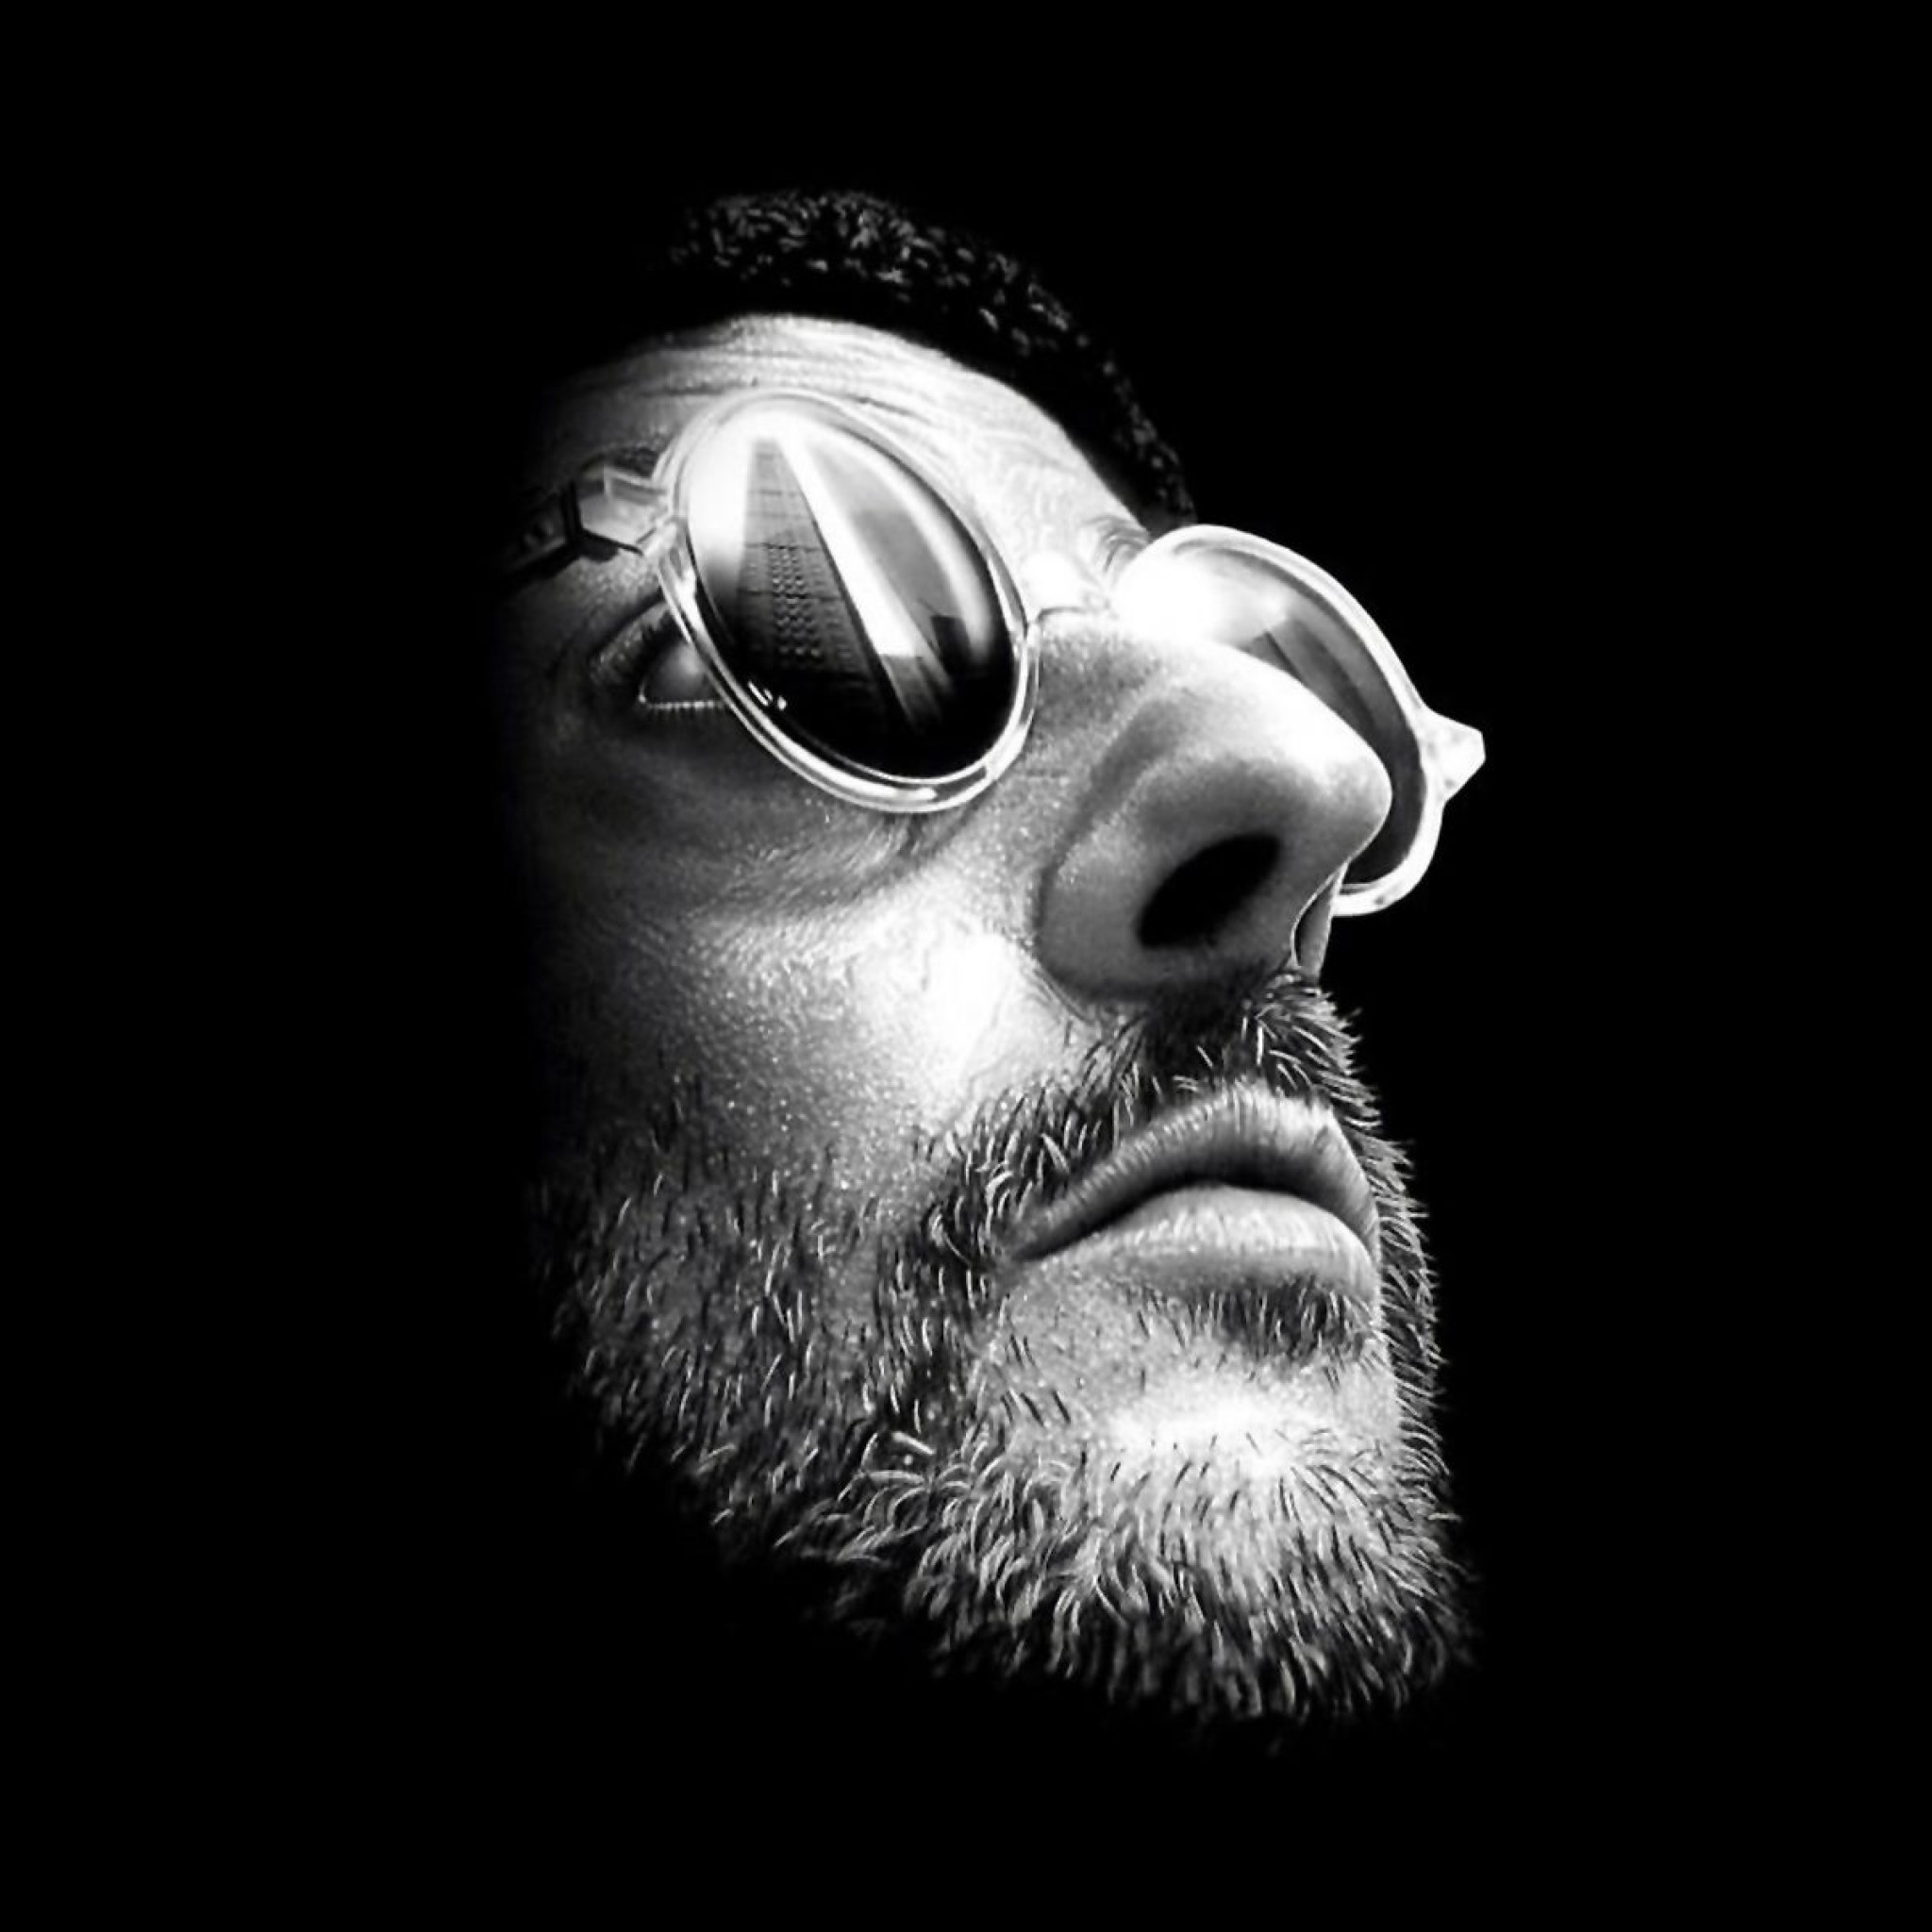 Leon The Professional Wallpaper Wallpapers Pic Ipad タブレット壁紙ギャラリー